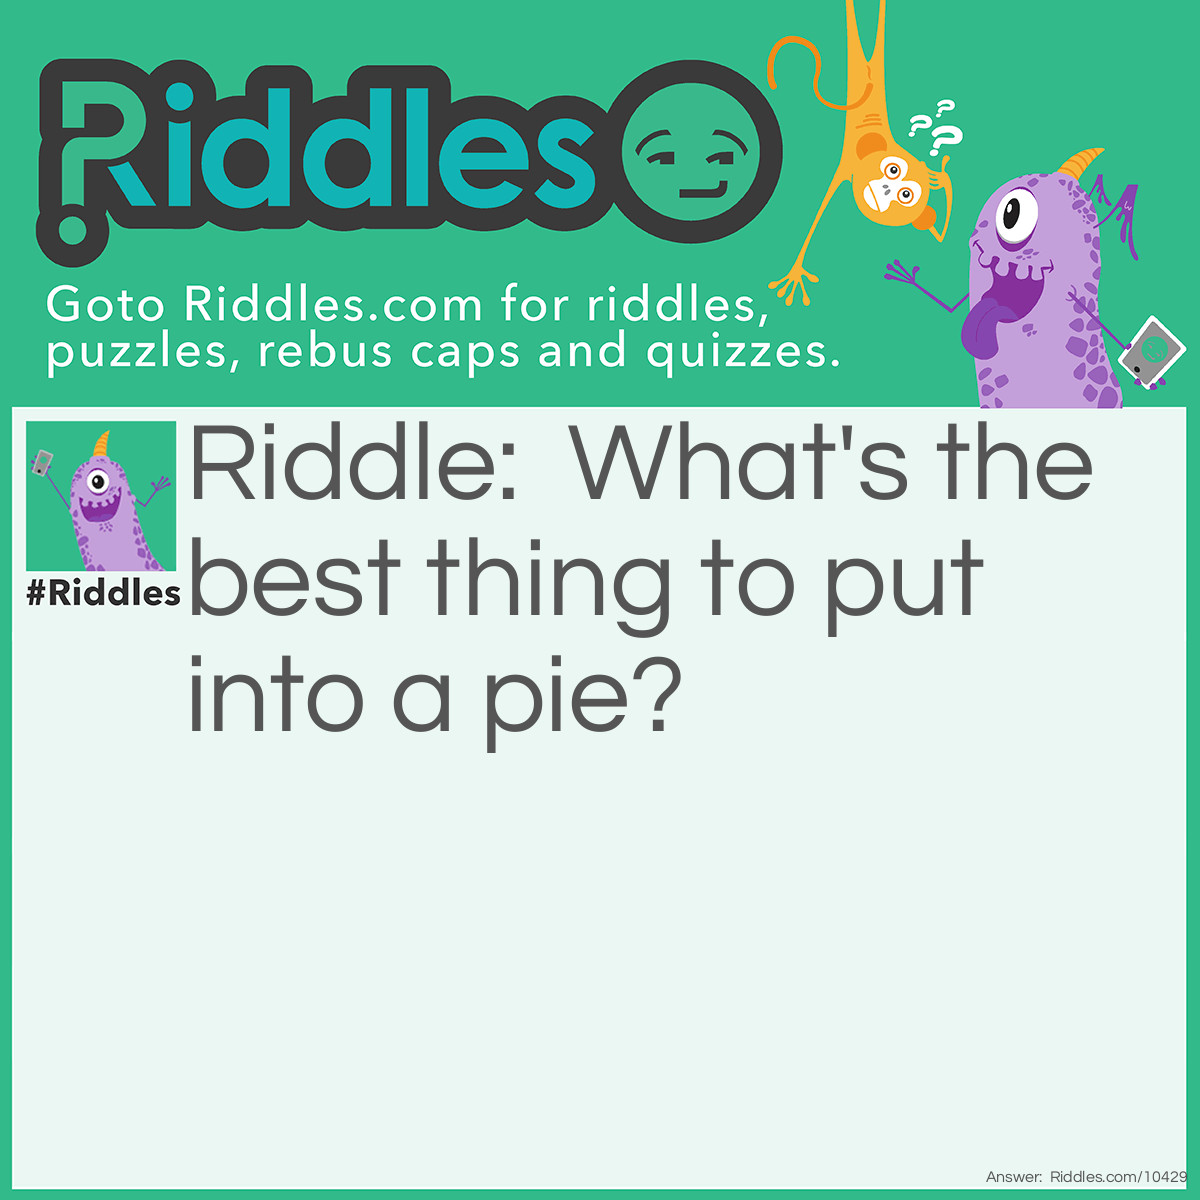 Riddle: What's the best thing to put into a pie? Answer: Your teeth.